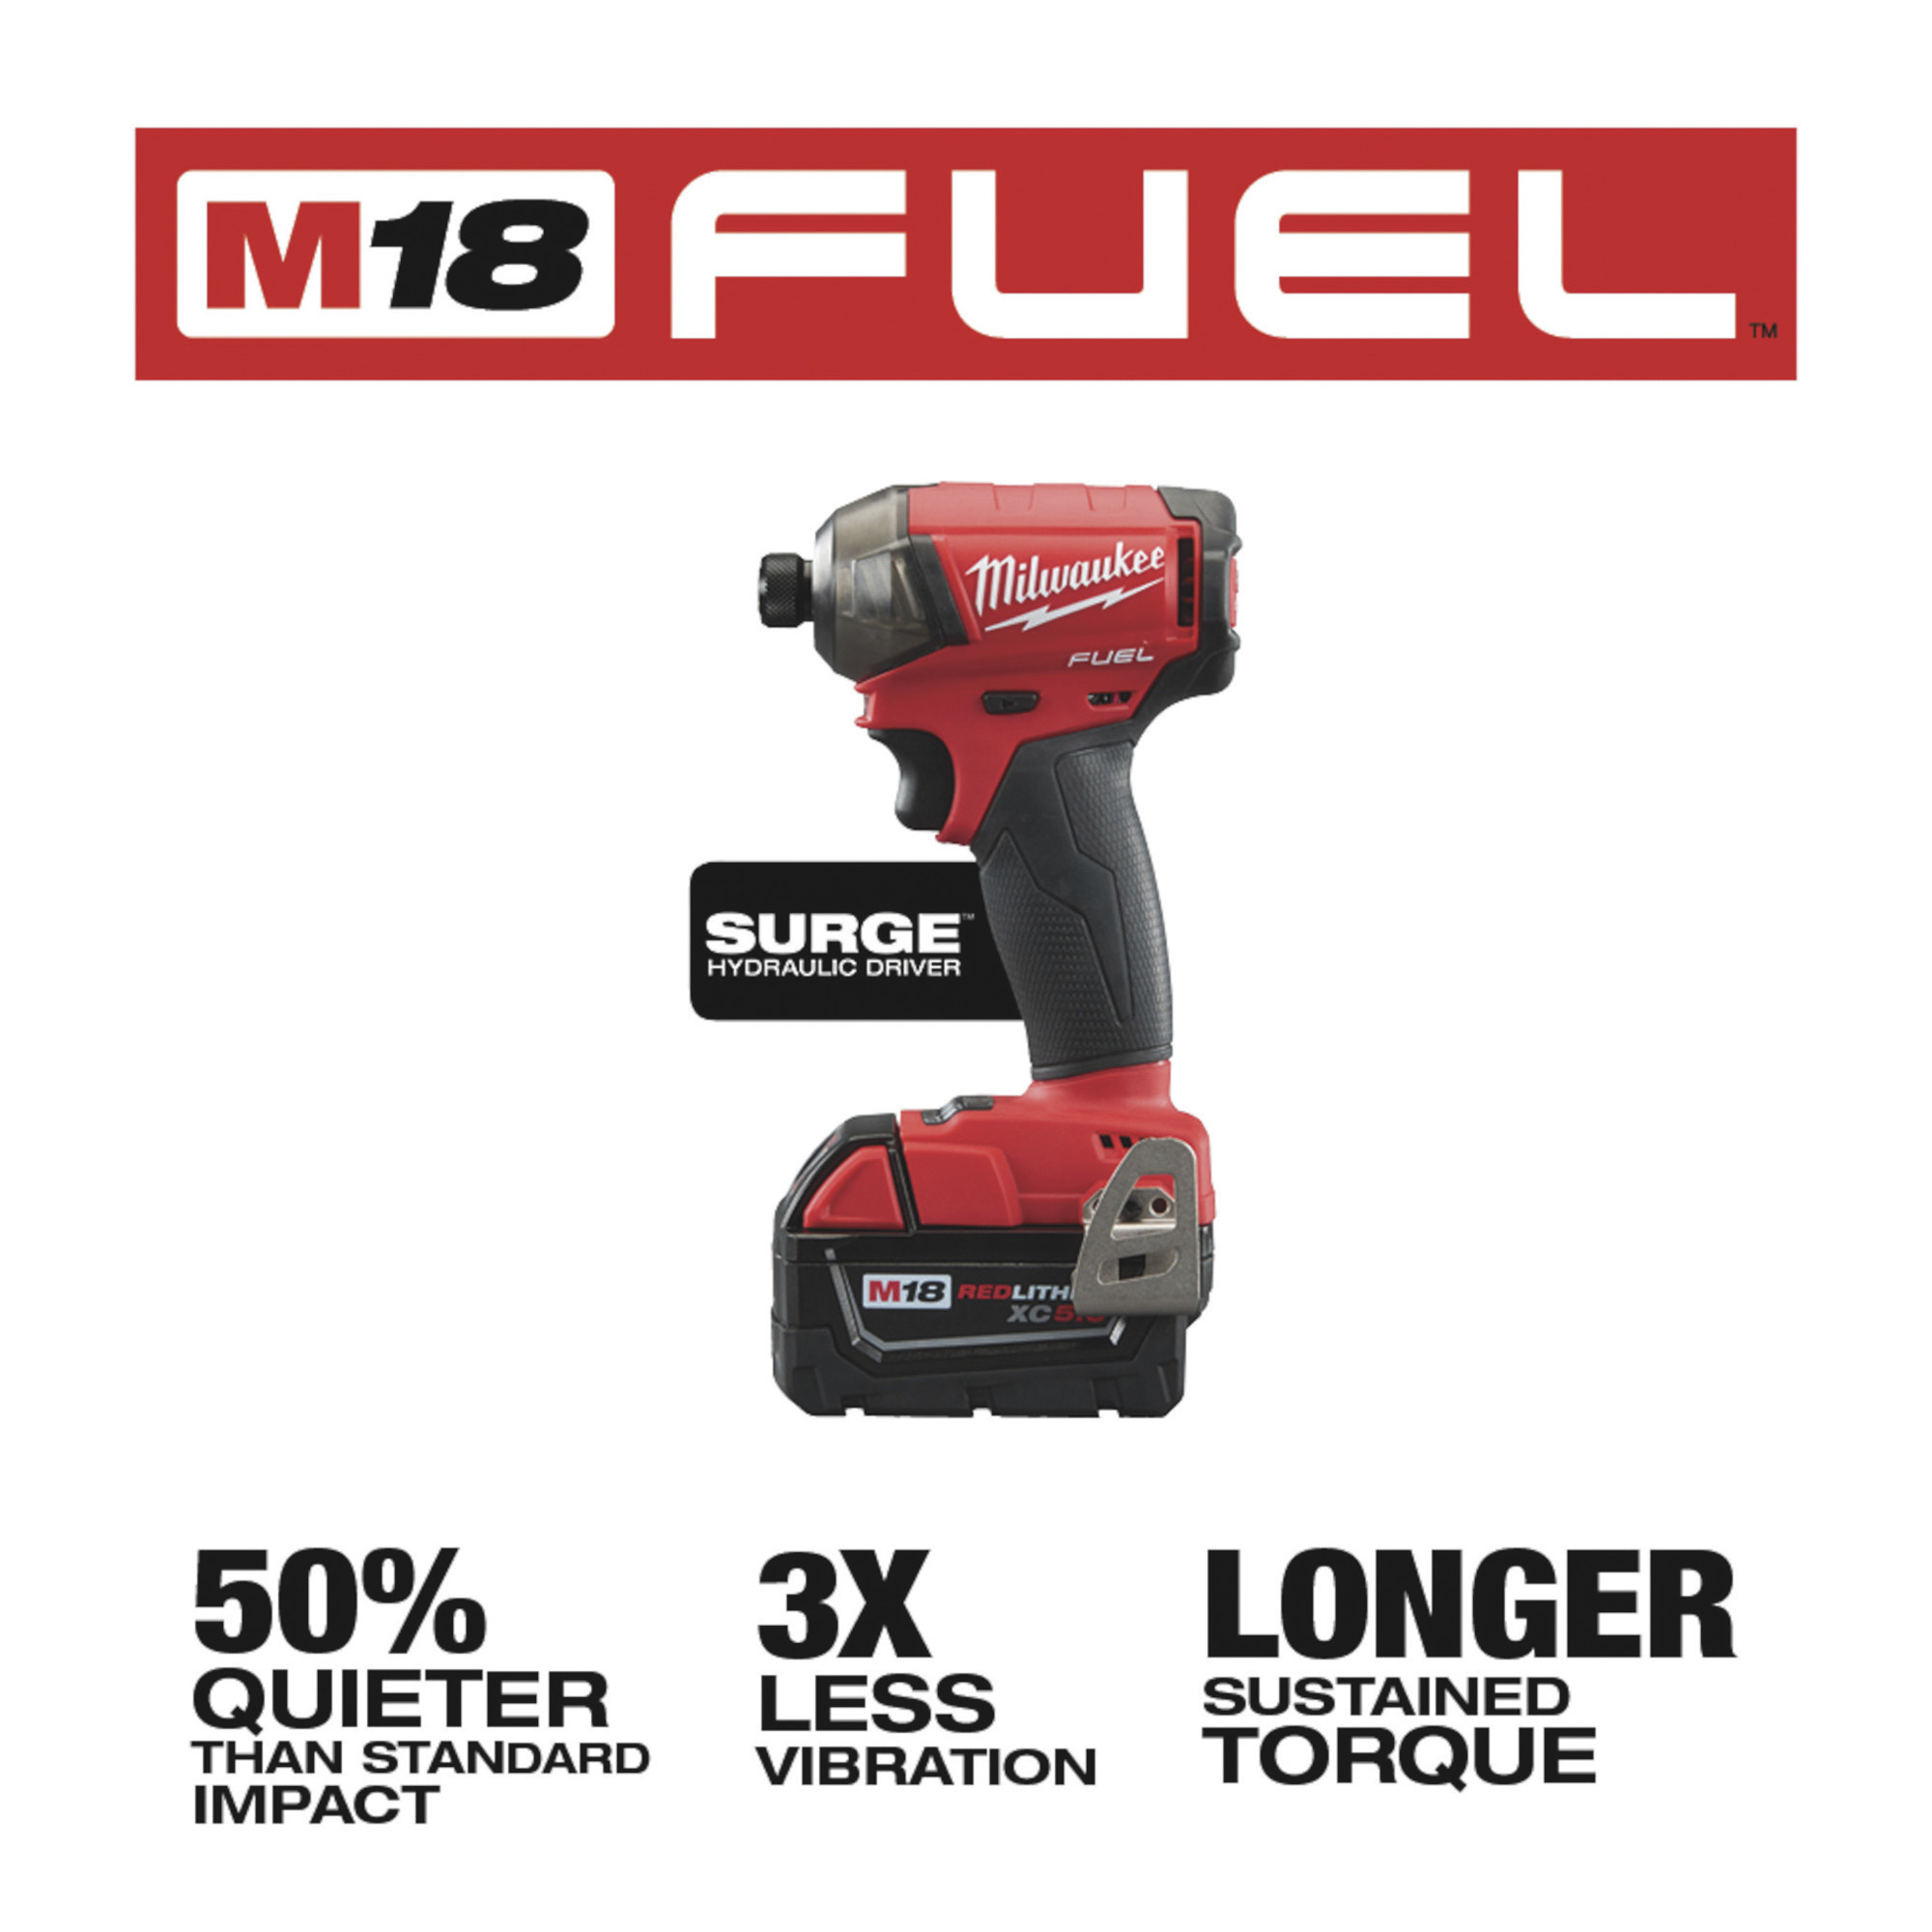 Milwaukee M18 FUEL Surge Cordless Hydraulic Impact Driver Kit — 1/4in. Hex  Drive, 37.5 Ft./Lbs. Torque, Batteries, Model# 2760-22 Northern Tool